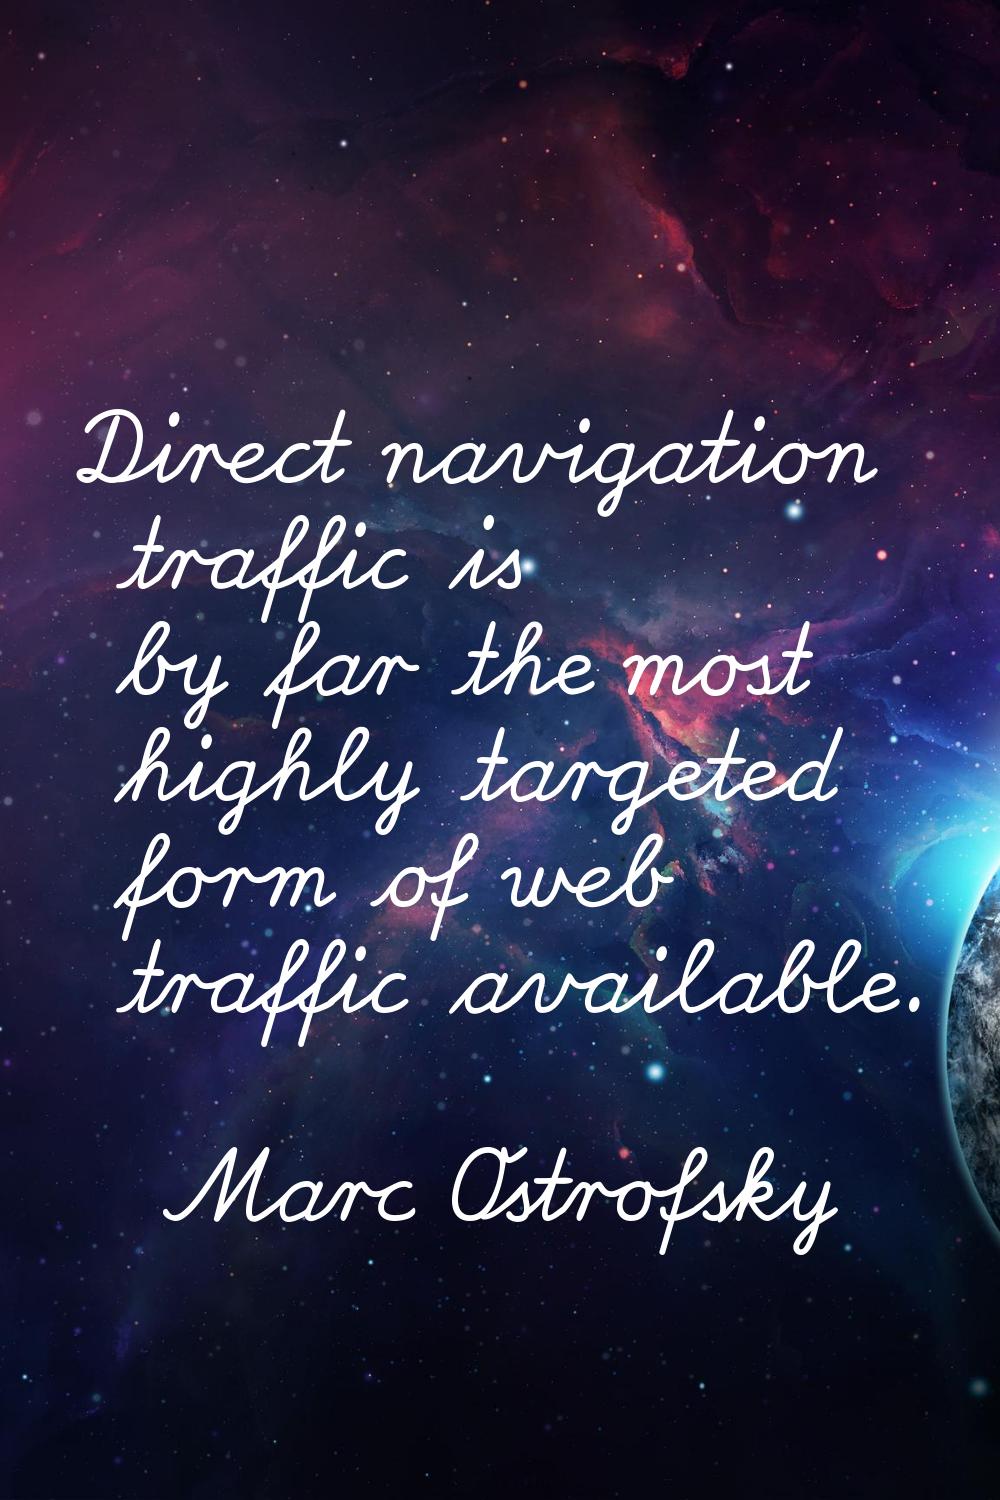 Direct navigation traffic is by far the most highly targeted form of web traffic available.